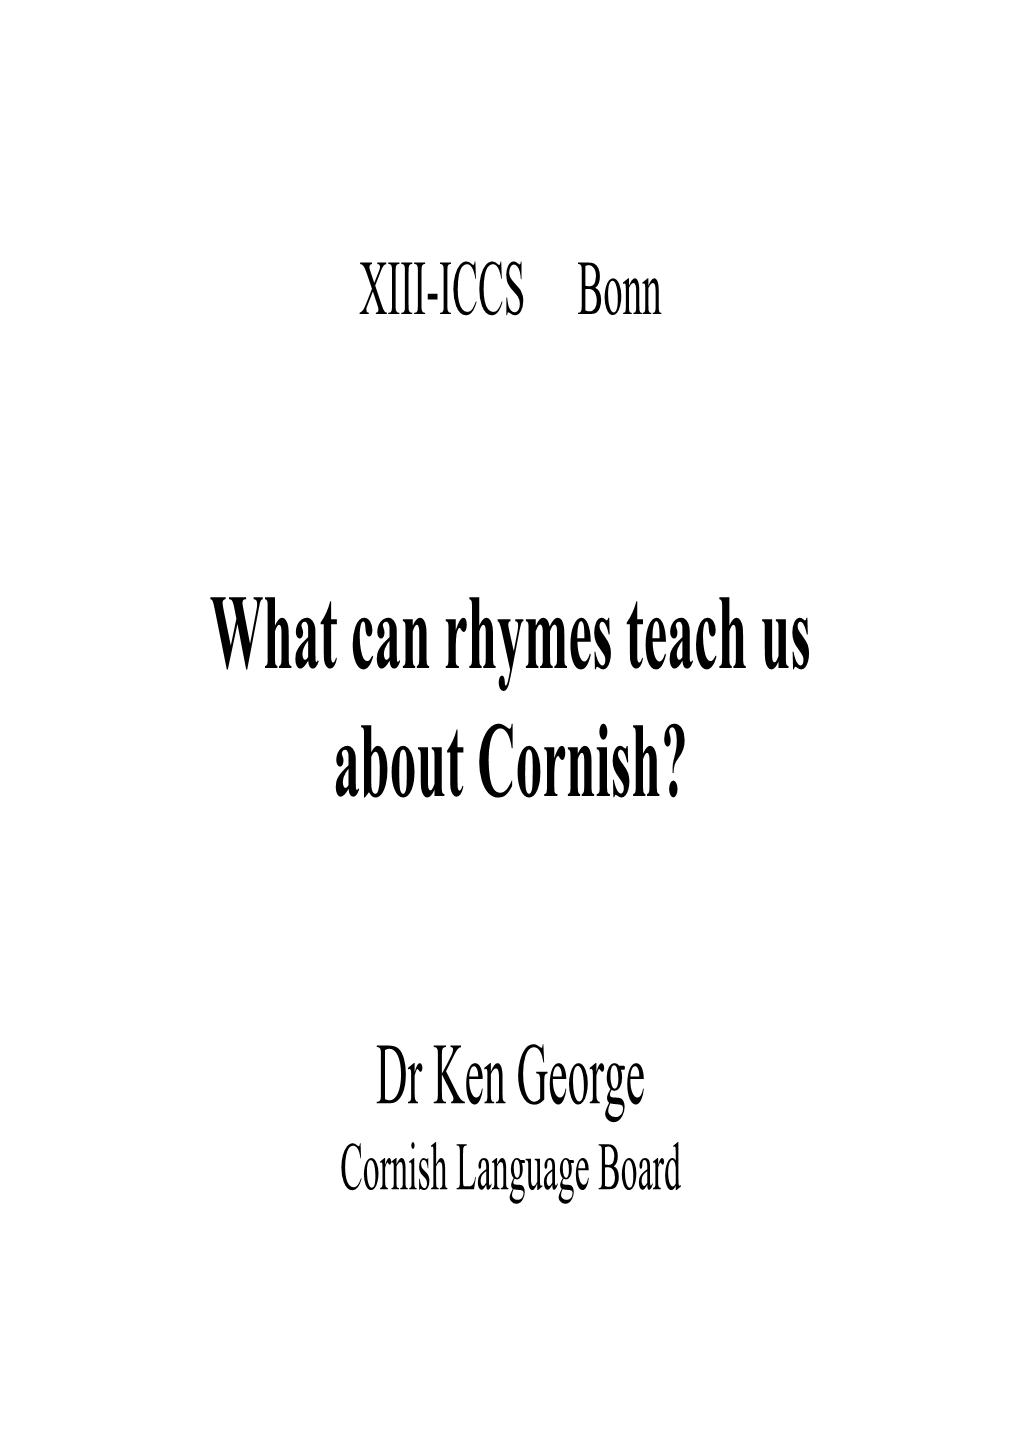 What Can Rhymes Teach Us About Cornish?